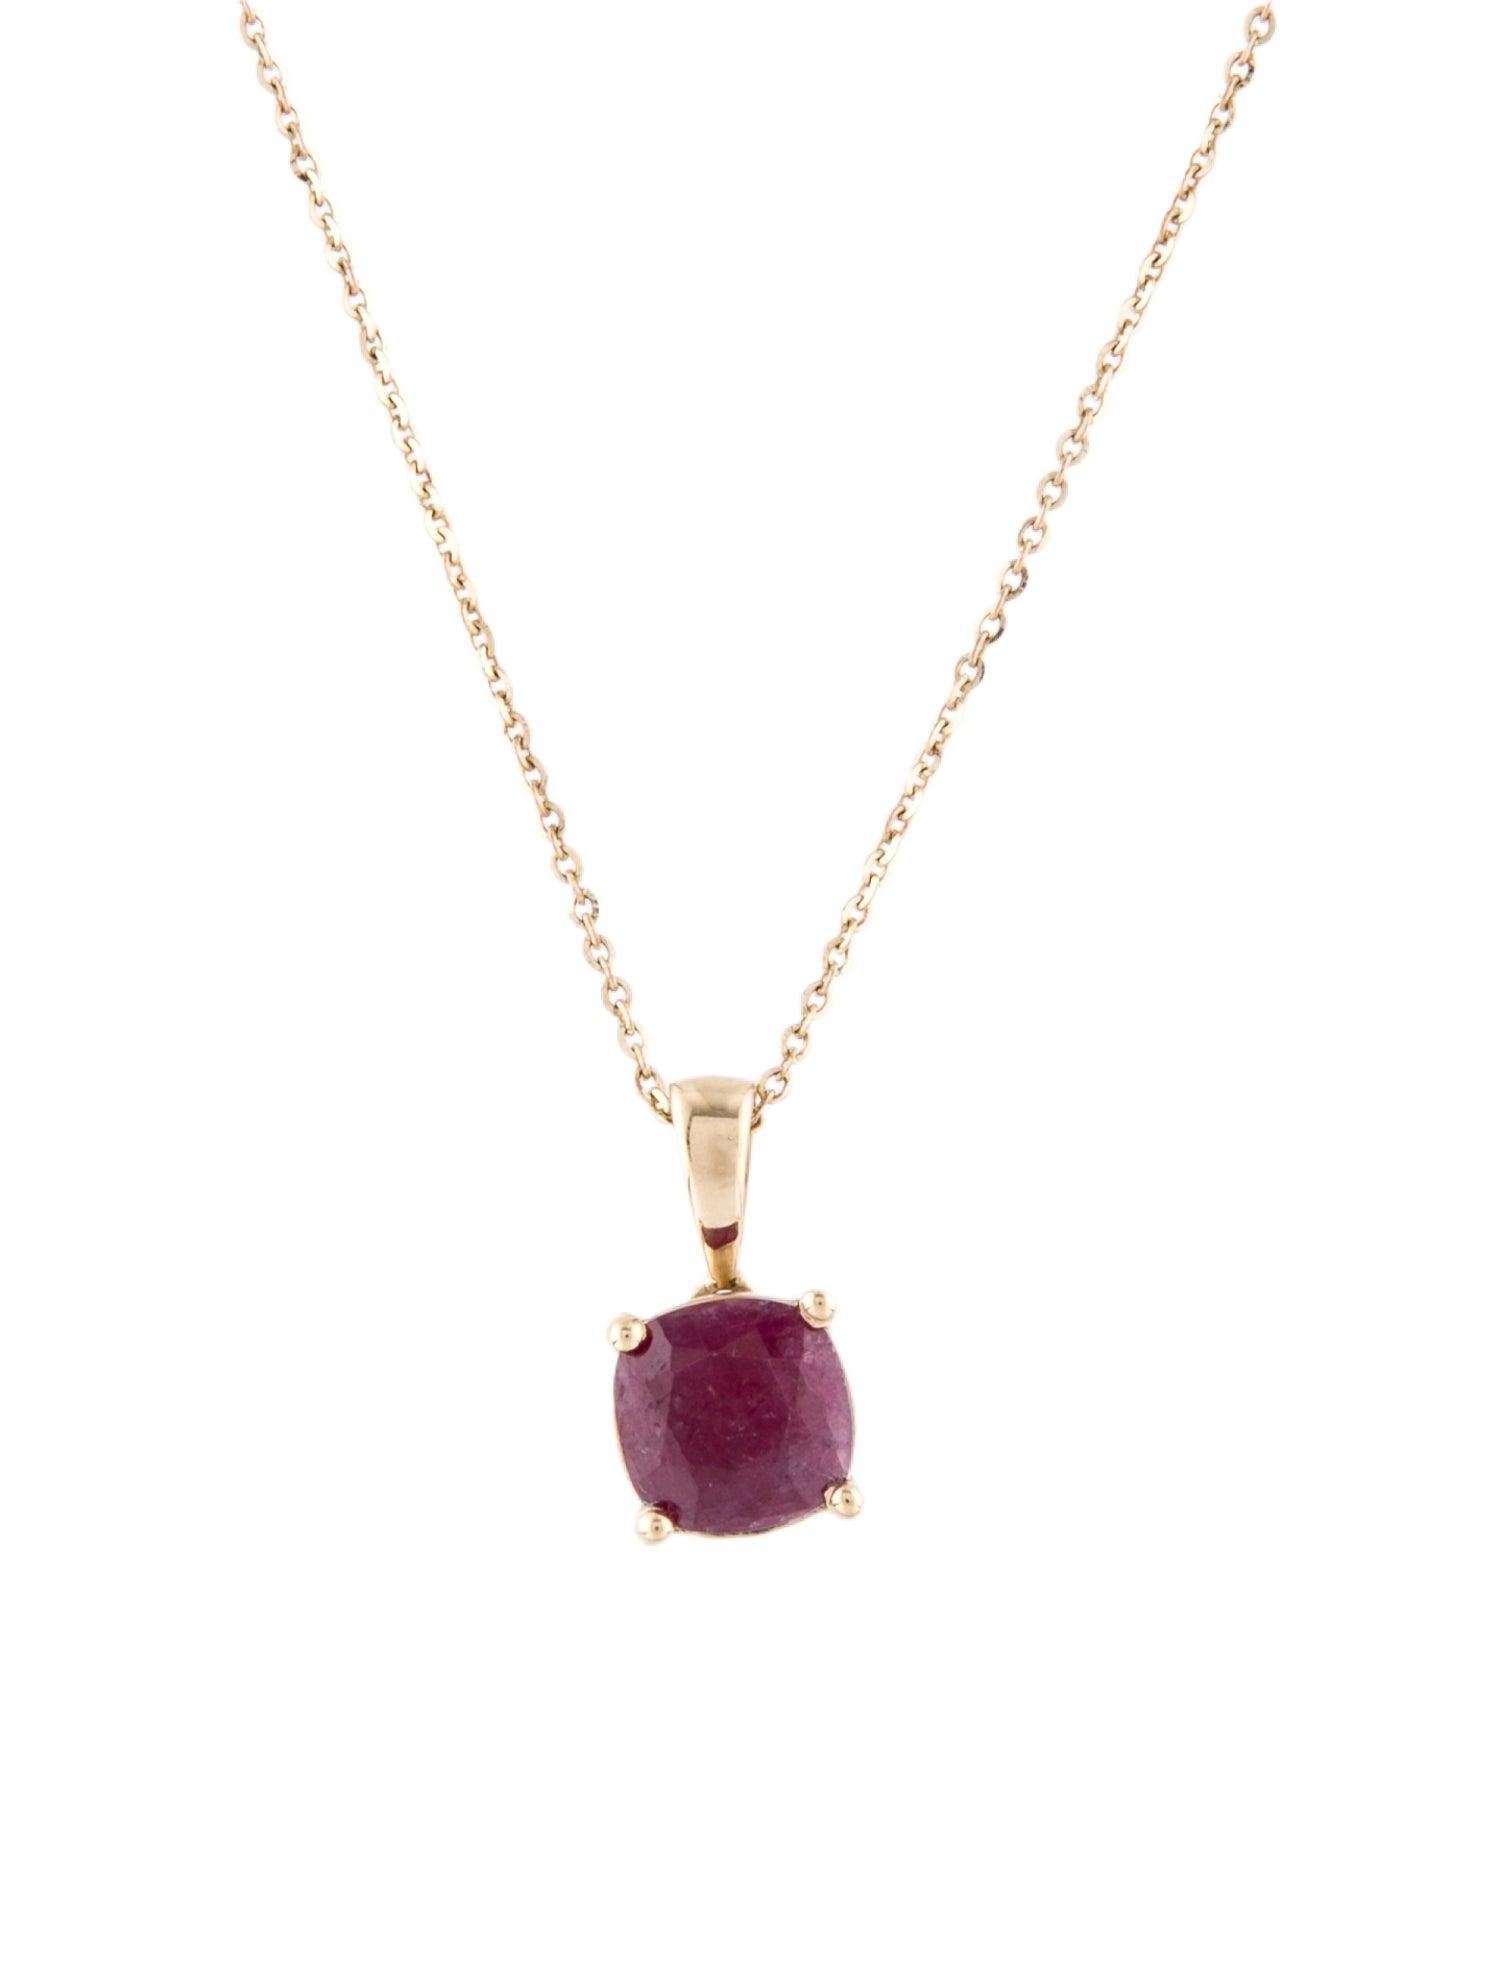 Gorgeous 14K Ruby Pendant Necklace  2.08ct Sparkling Gemstone Statement Piece In New Condition For Sale In Holtsville, NY